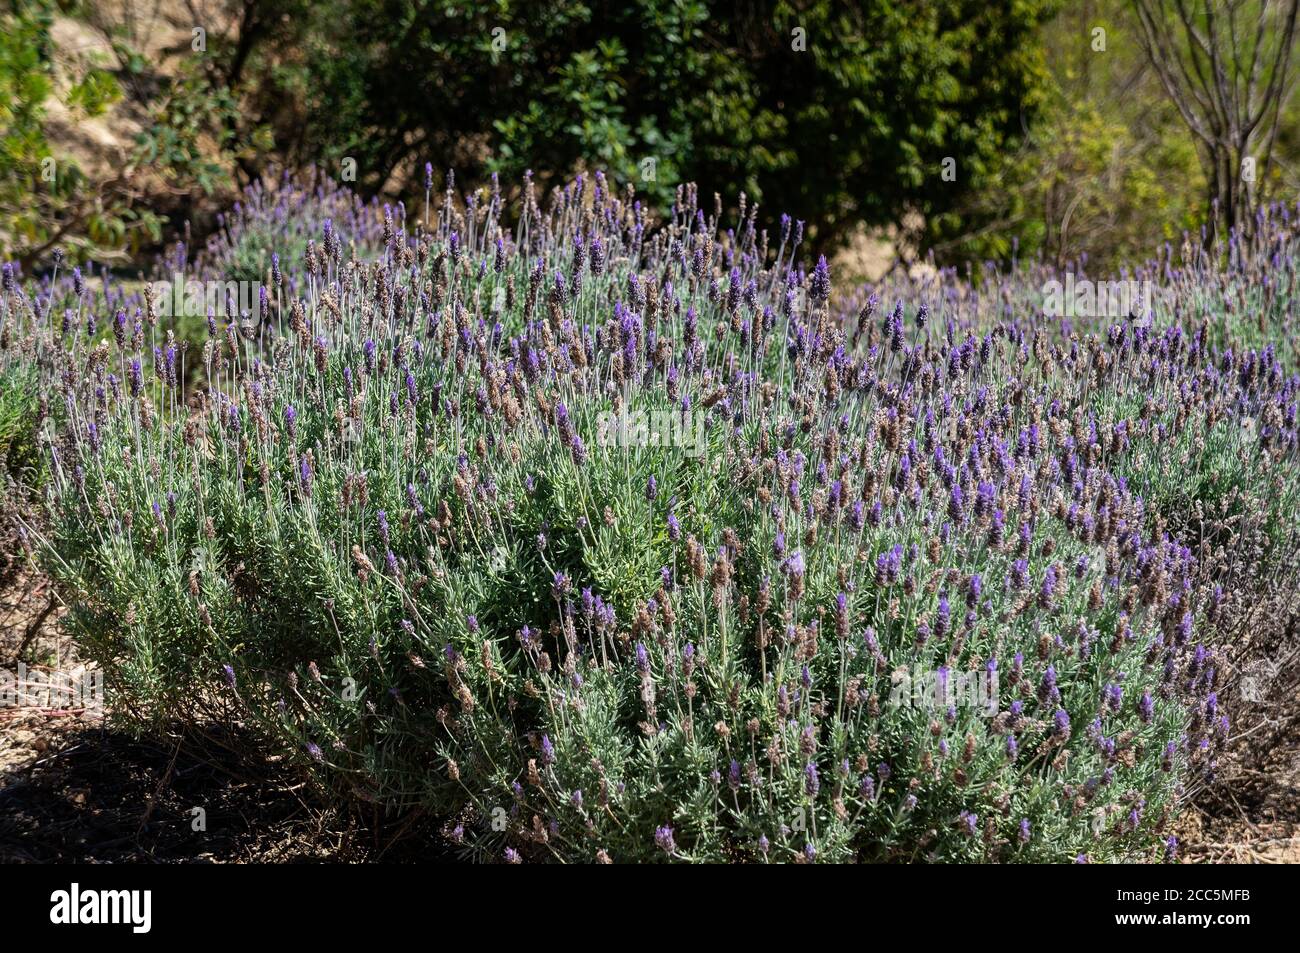 Lavender flowers (Lavandula dentata - species of flowering plant, Lamiaceae family) cultivated in the agriculture fields of Cunha, Sao Paulo, Brazil. Stock Photo